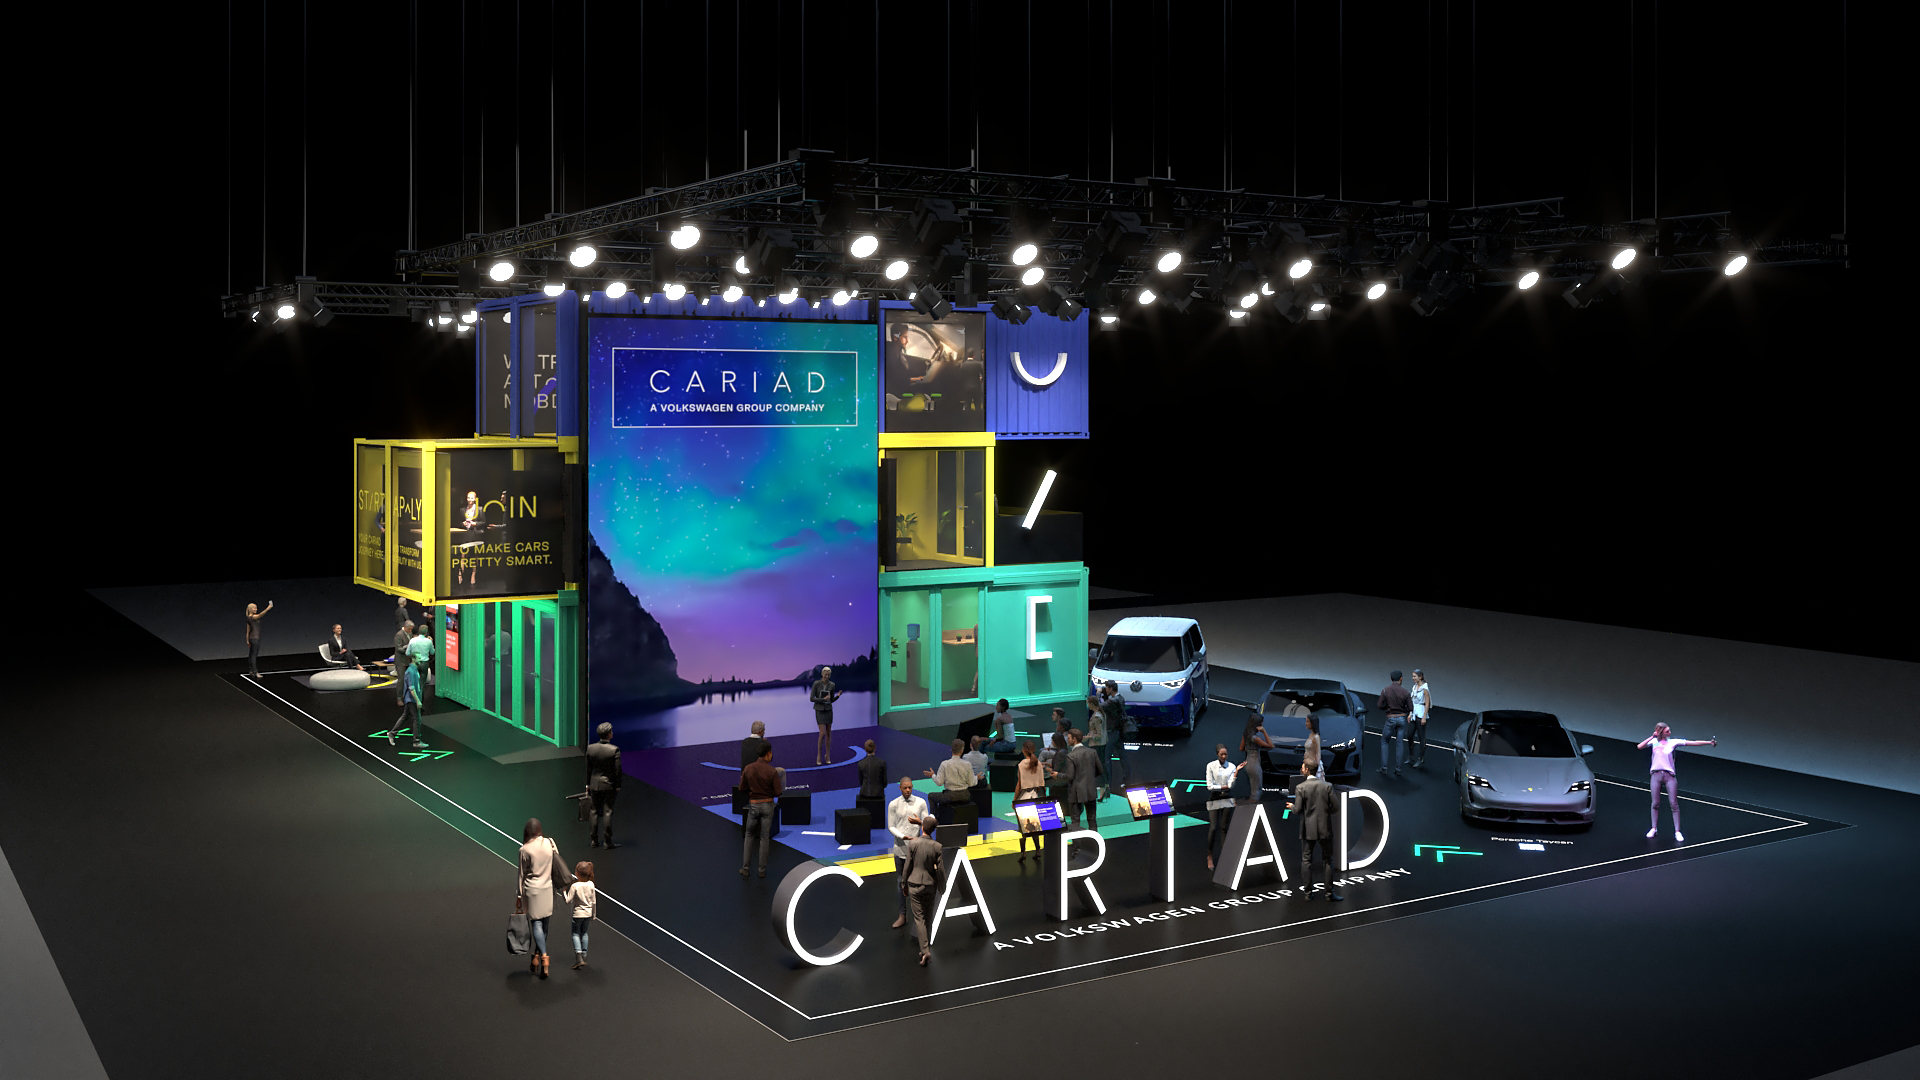 Volkswagen’s CARIAD acquiring the Mobility Services Platform business unit of Hexad GmbH